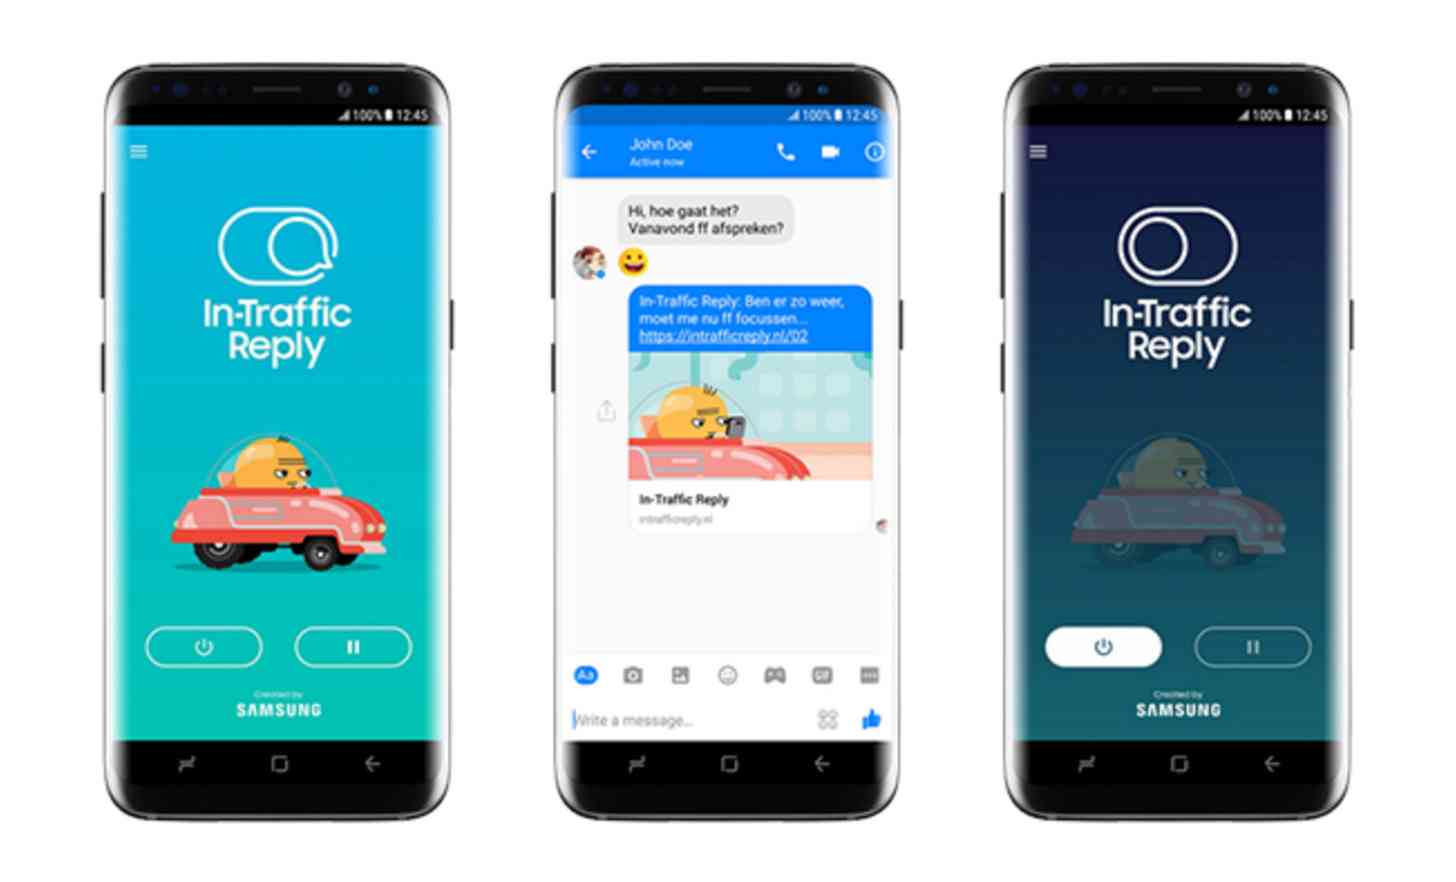 Samsung In-Traffic Reply Android app